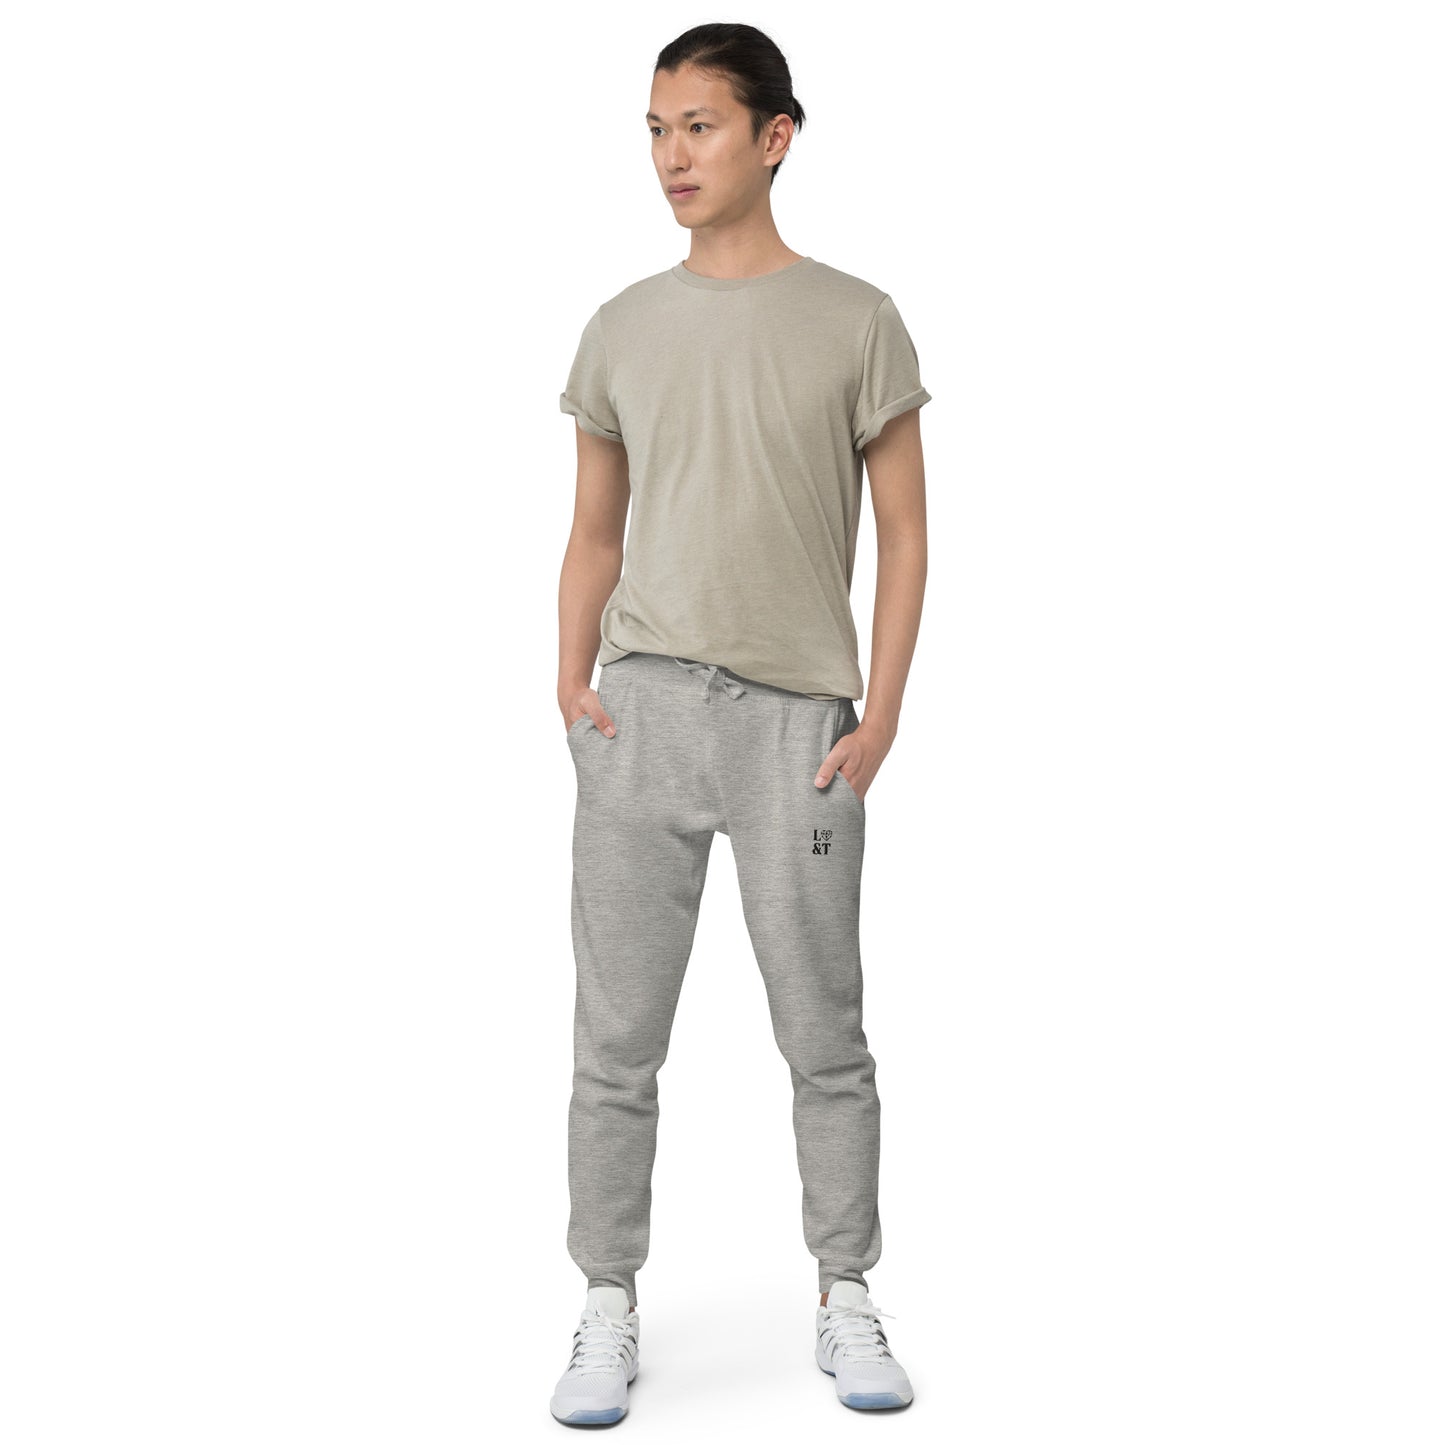 L&T Embroidered Unisex Fleece Jogger